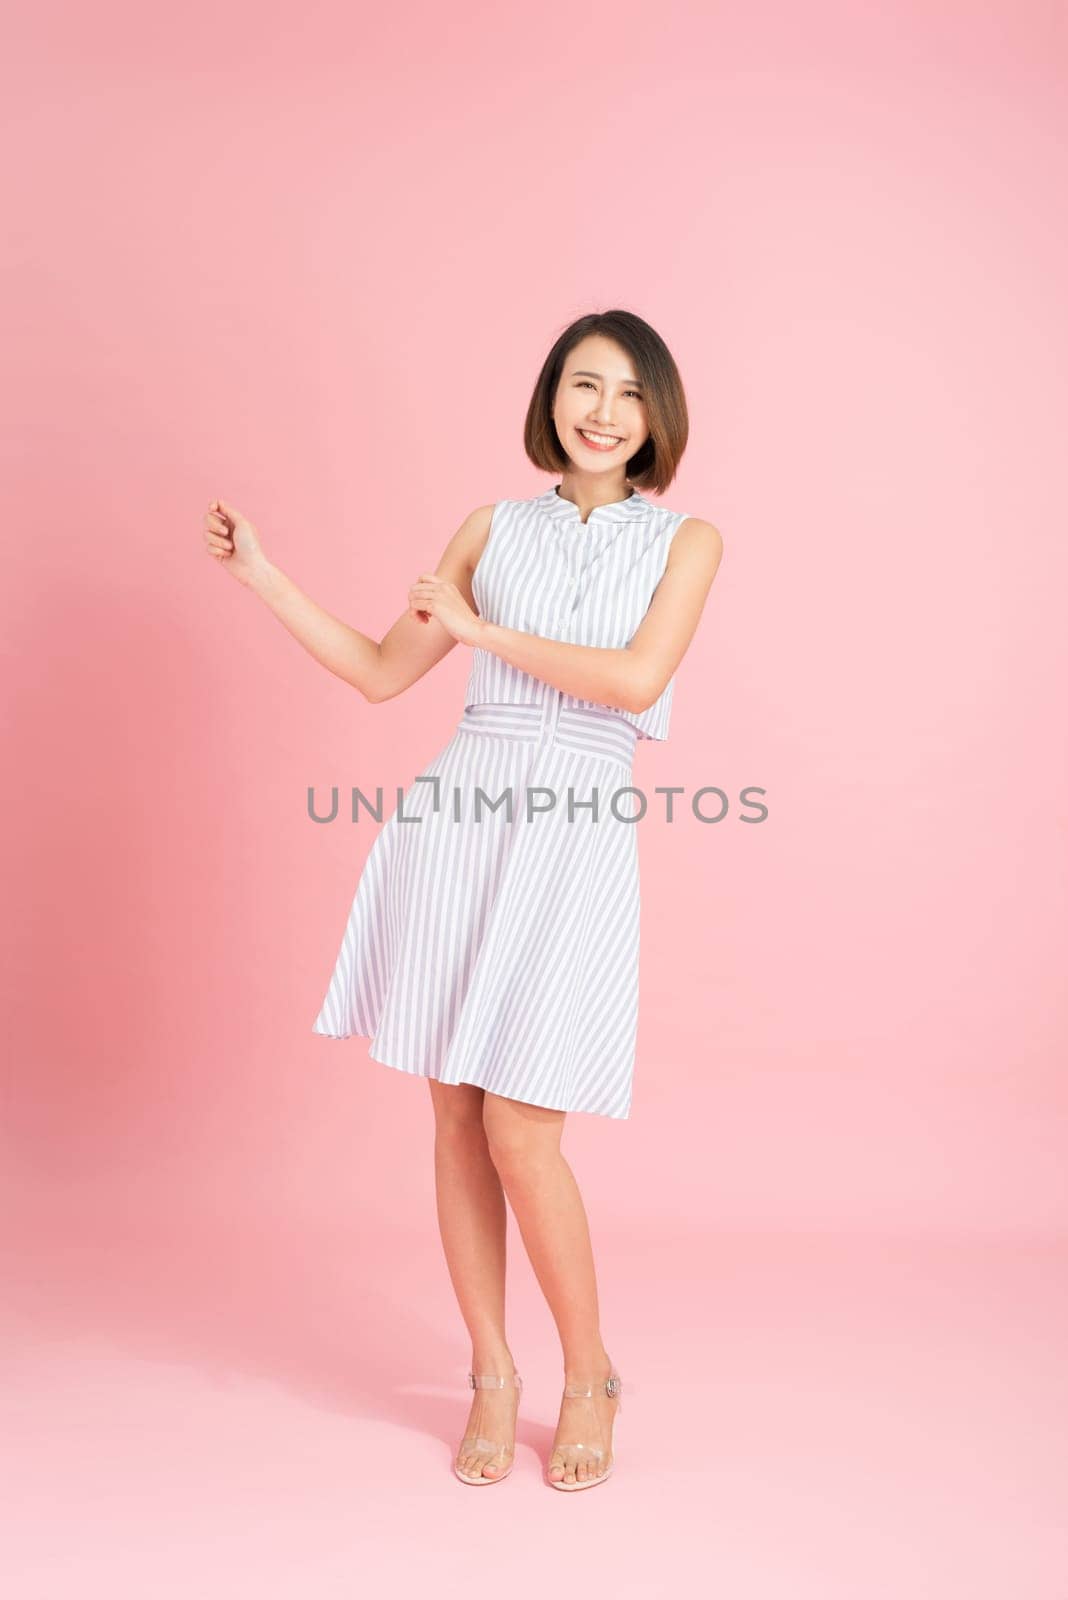 Confident girl laughing at camera. Studio shot of elegant white woman isolated on yellow background.